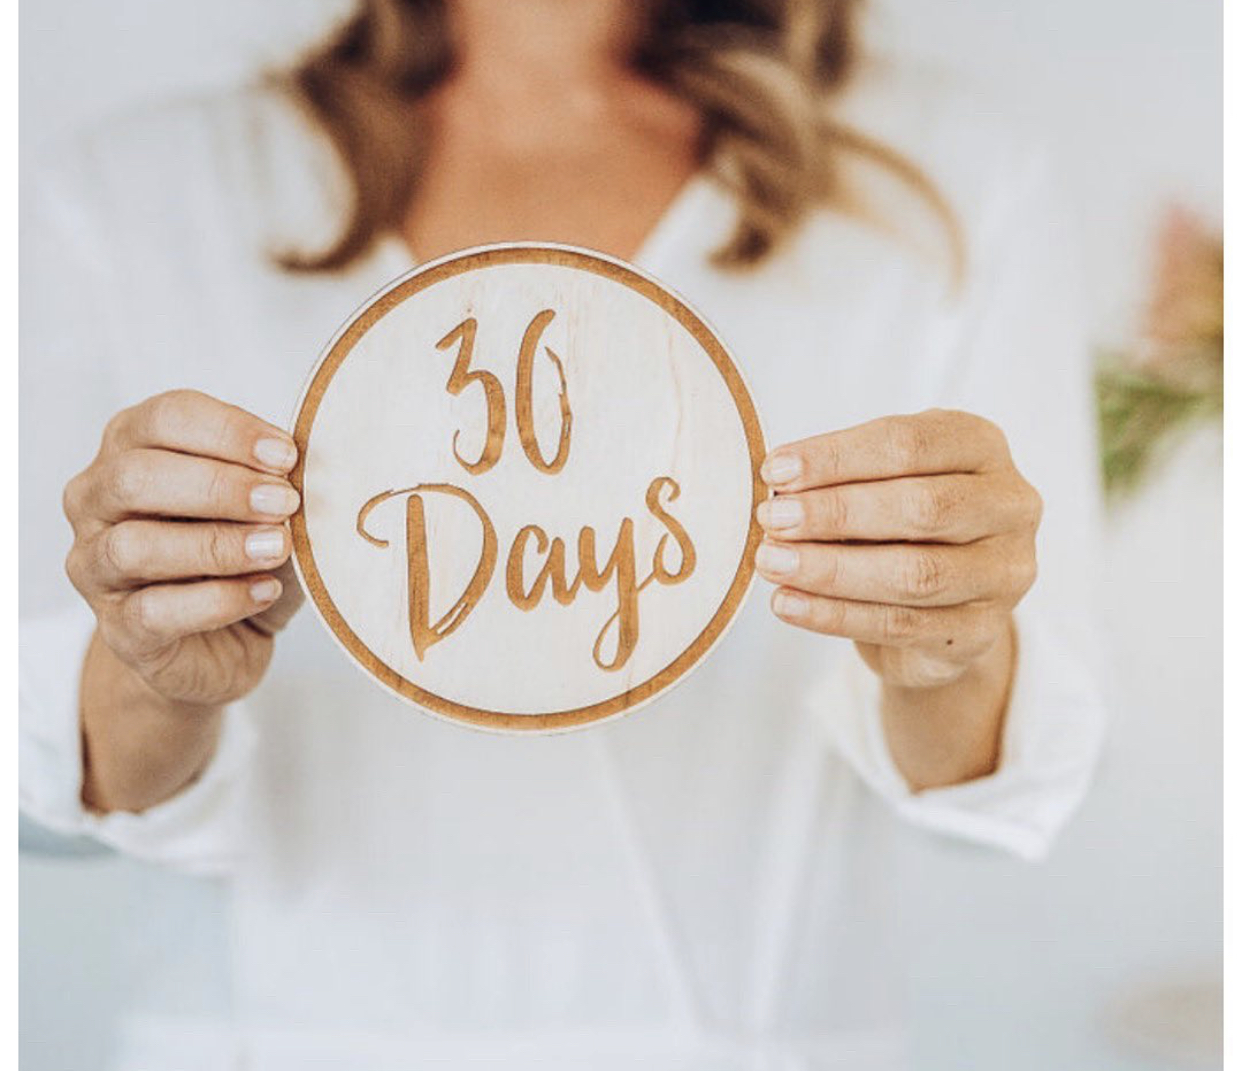 30 Days of Intentions